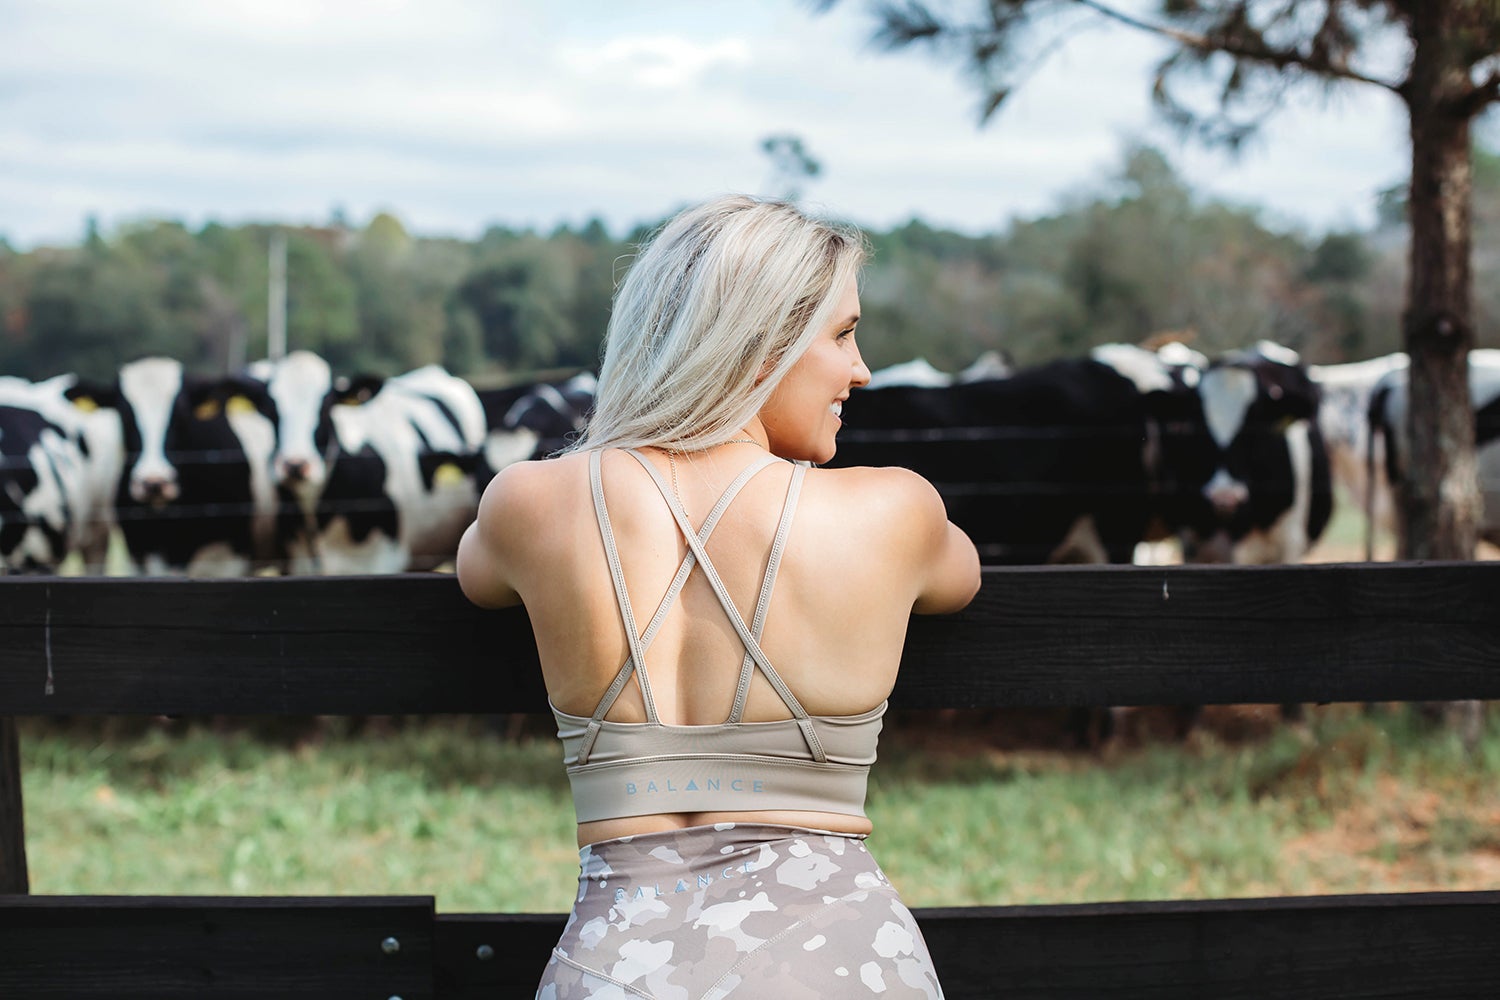 A woman in beige exercise clothing facing towards a herd of Holstein cows in a field